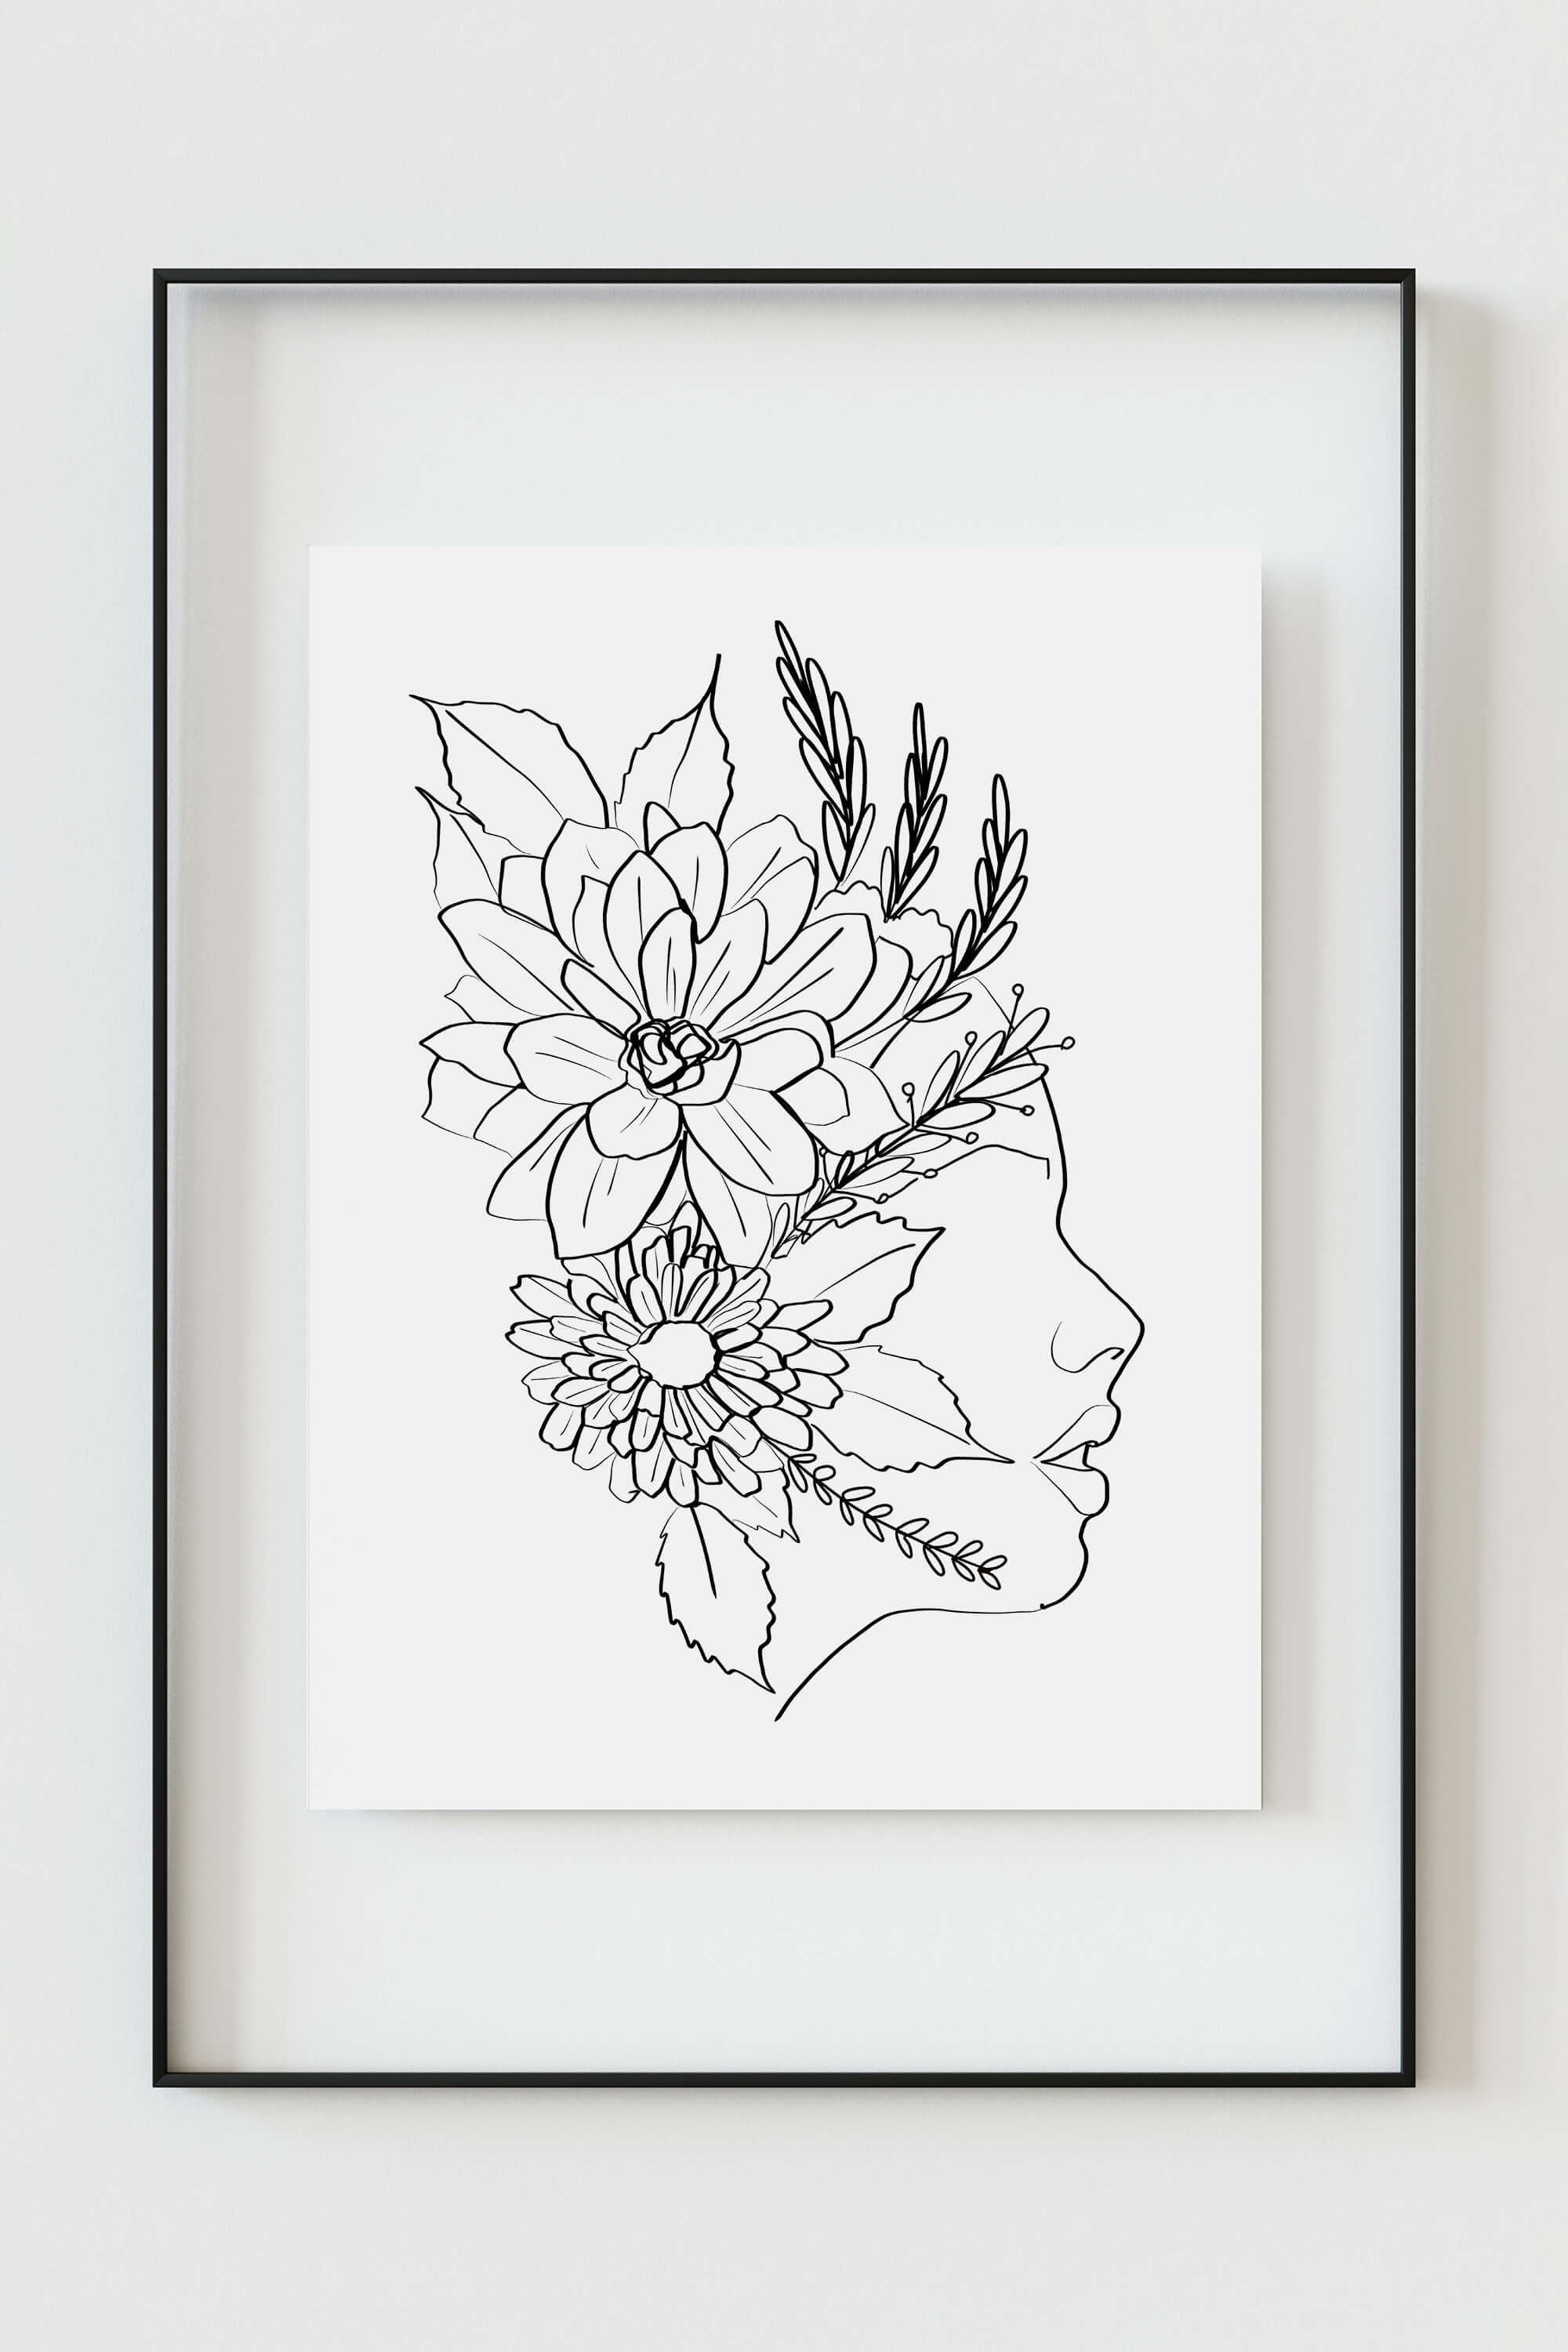 Unique Botanical Gift - Intricate Nature-Inspired Art Decor